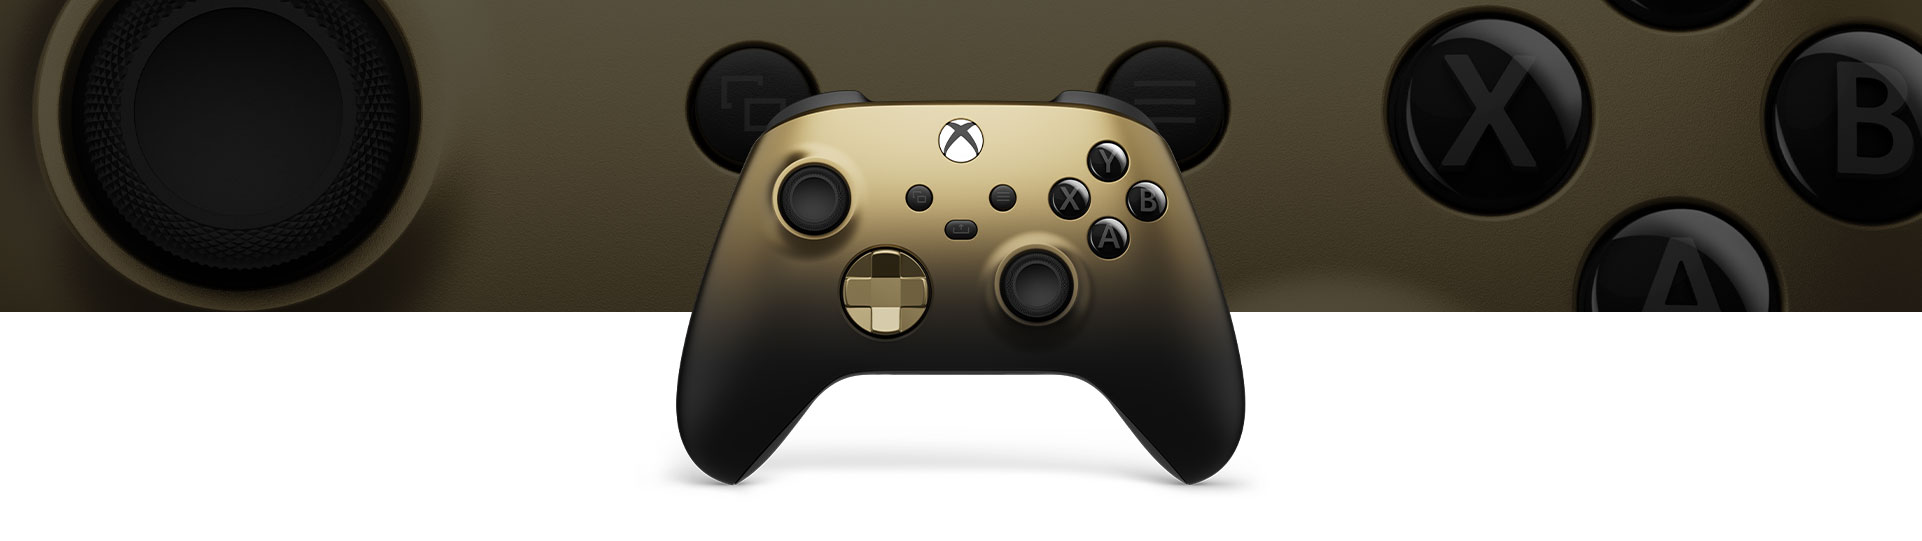 Front view of Xbox Wireless Controller – Gold Shadow Special Edition with close-up view in the background.